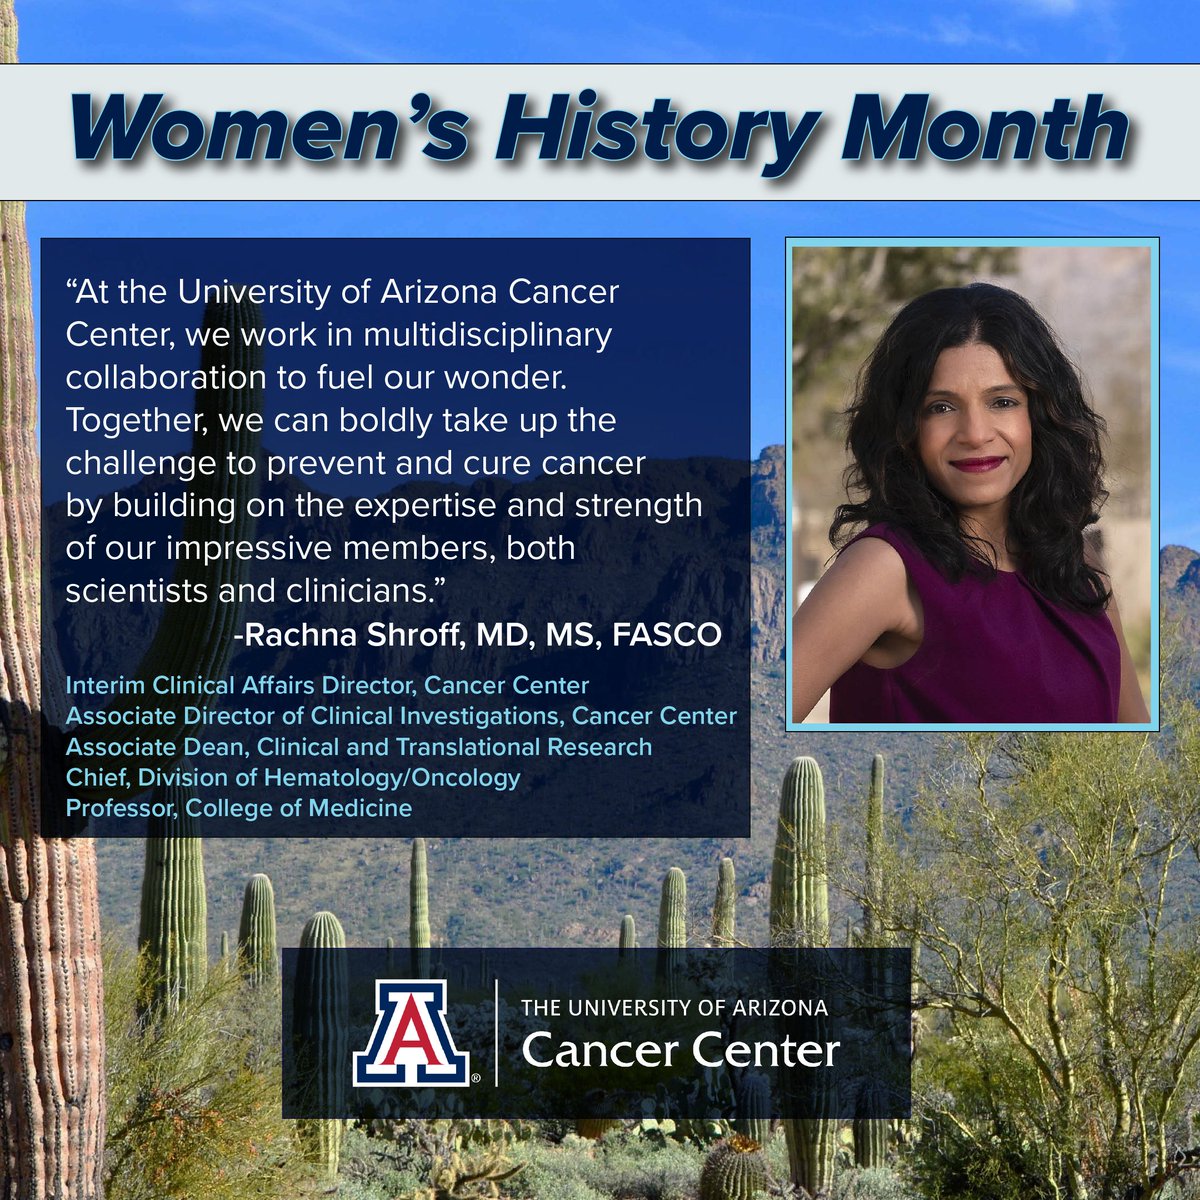 In honor of Women's History Month, join us in celebrating the incredible women shaping the history and future of cancer research at the UArizona Cancer Center! @UAZMedTucson @rachnatshroff #womenshistorymonth #BearDownonCancer #FuelWonder